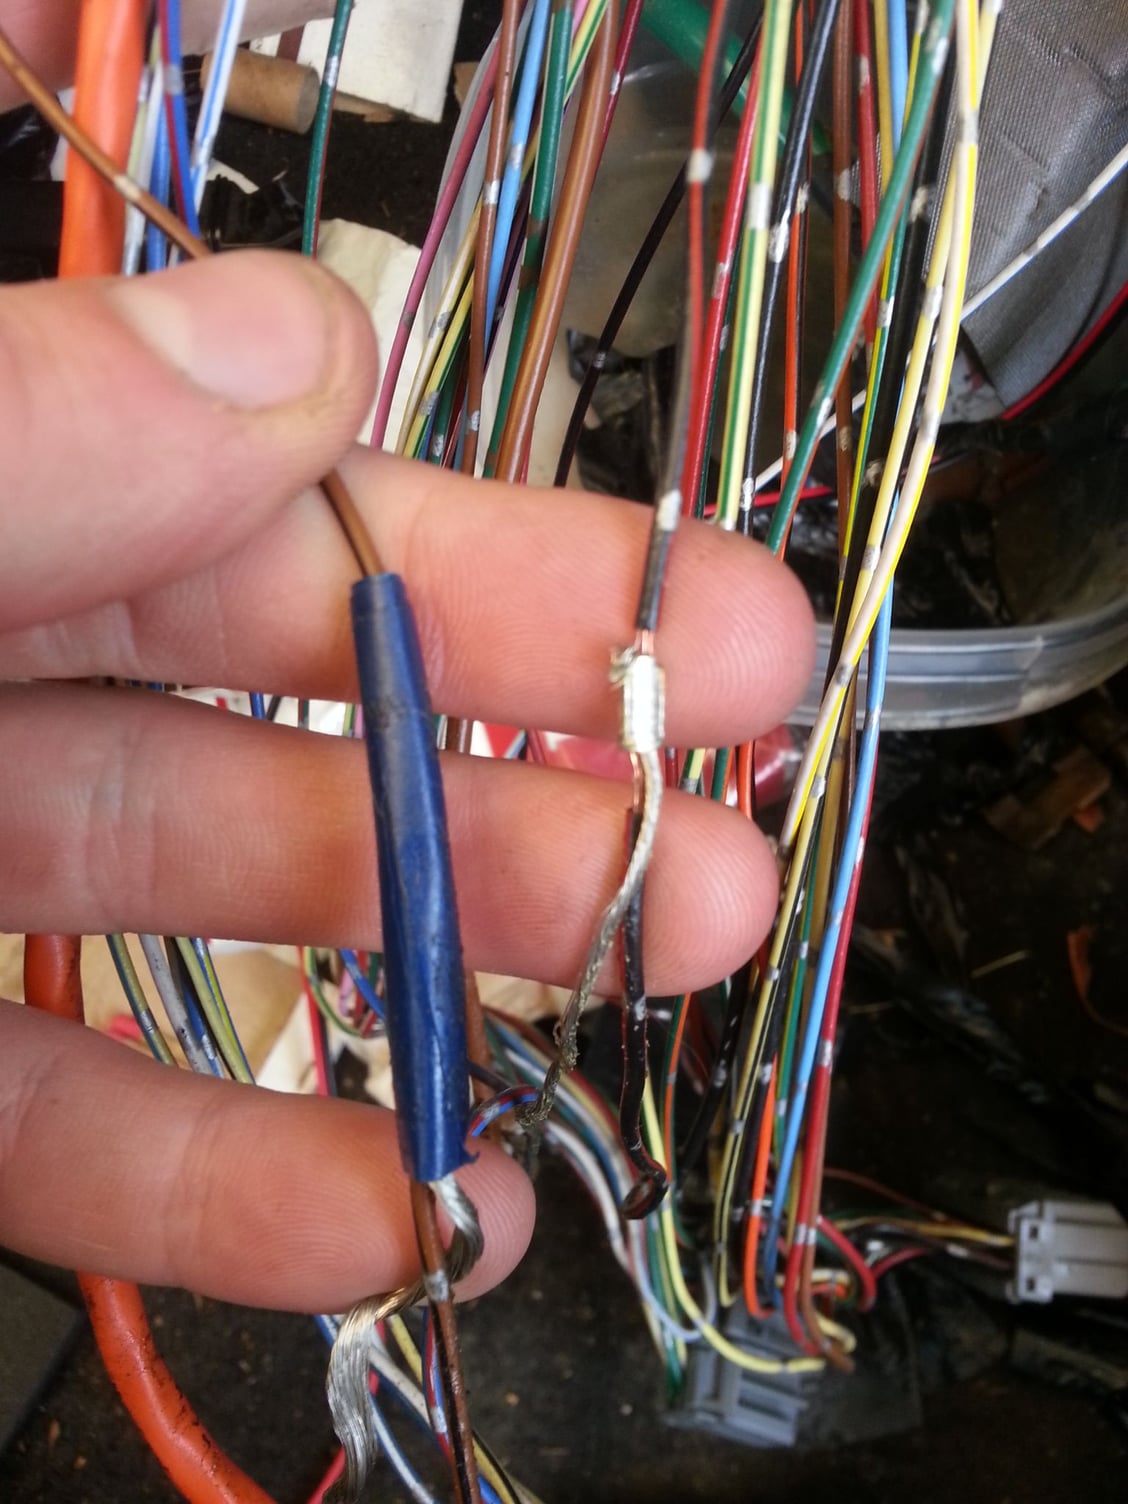 95 Civic - Is this wiring harness factory correct or modified? - Honda